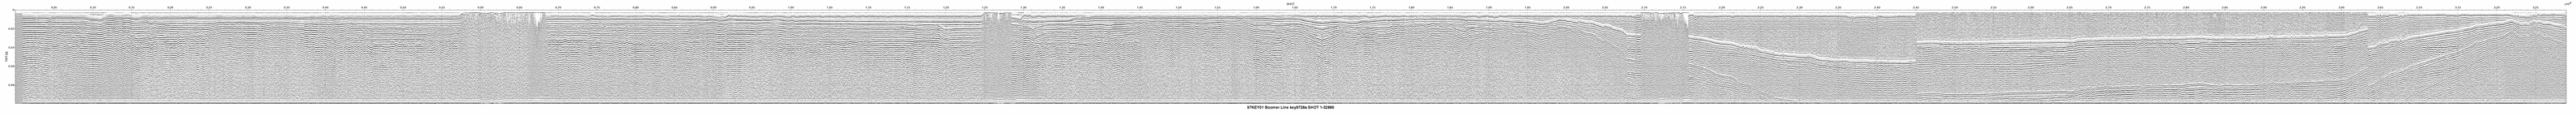 Thumbnail GIF image of the seismic trackline key9728a, with a hotlink to the more detailed, larger JPG image.